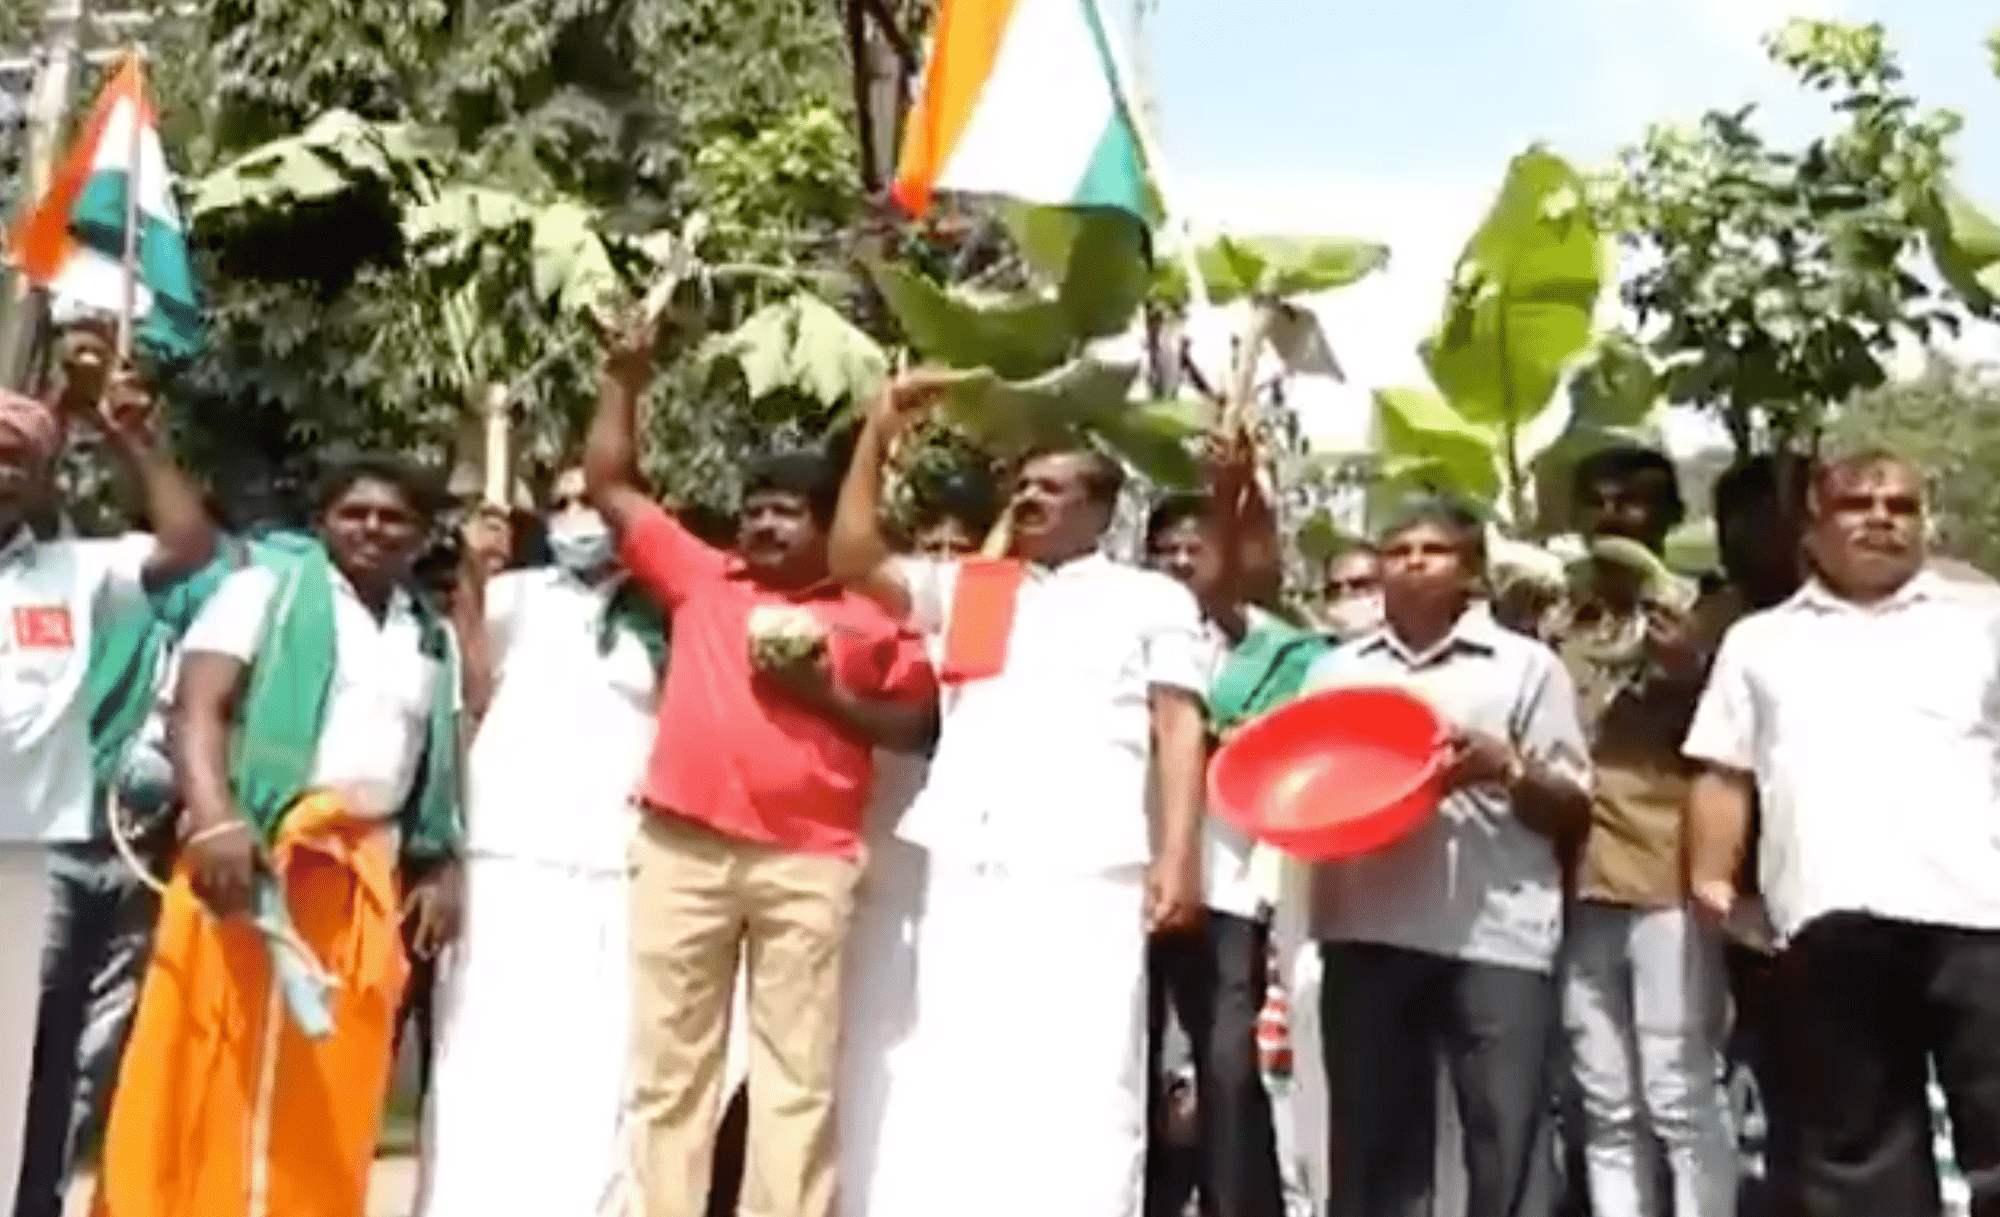 Farmers in Coimbatore stage protest against the farm laws.